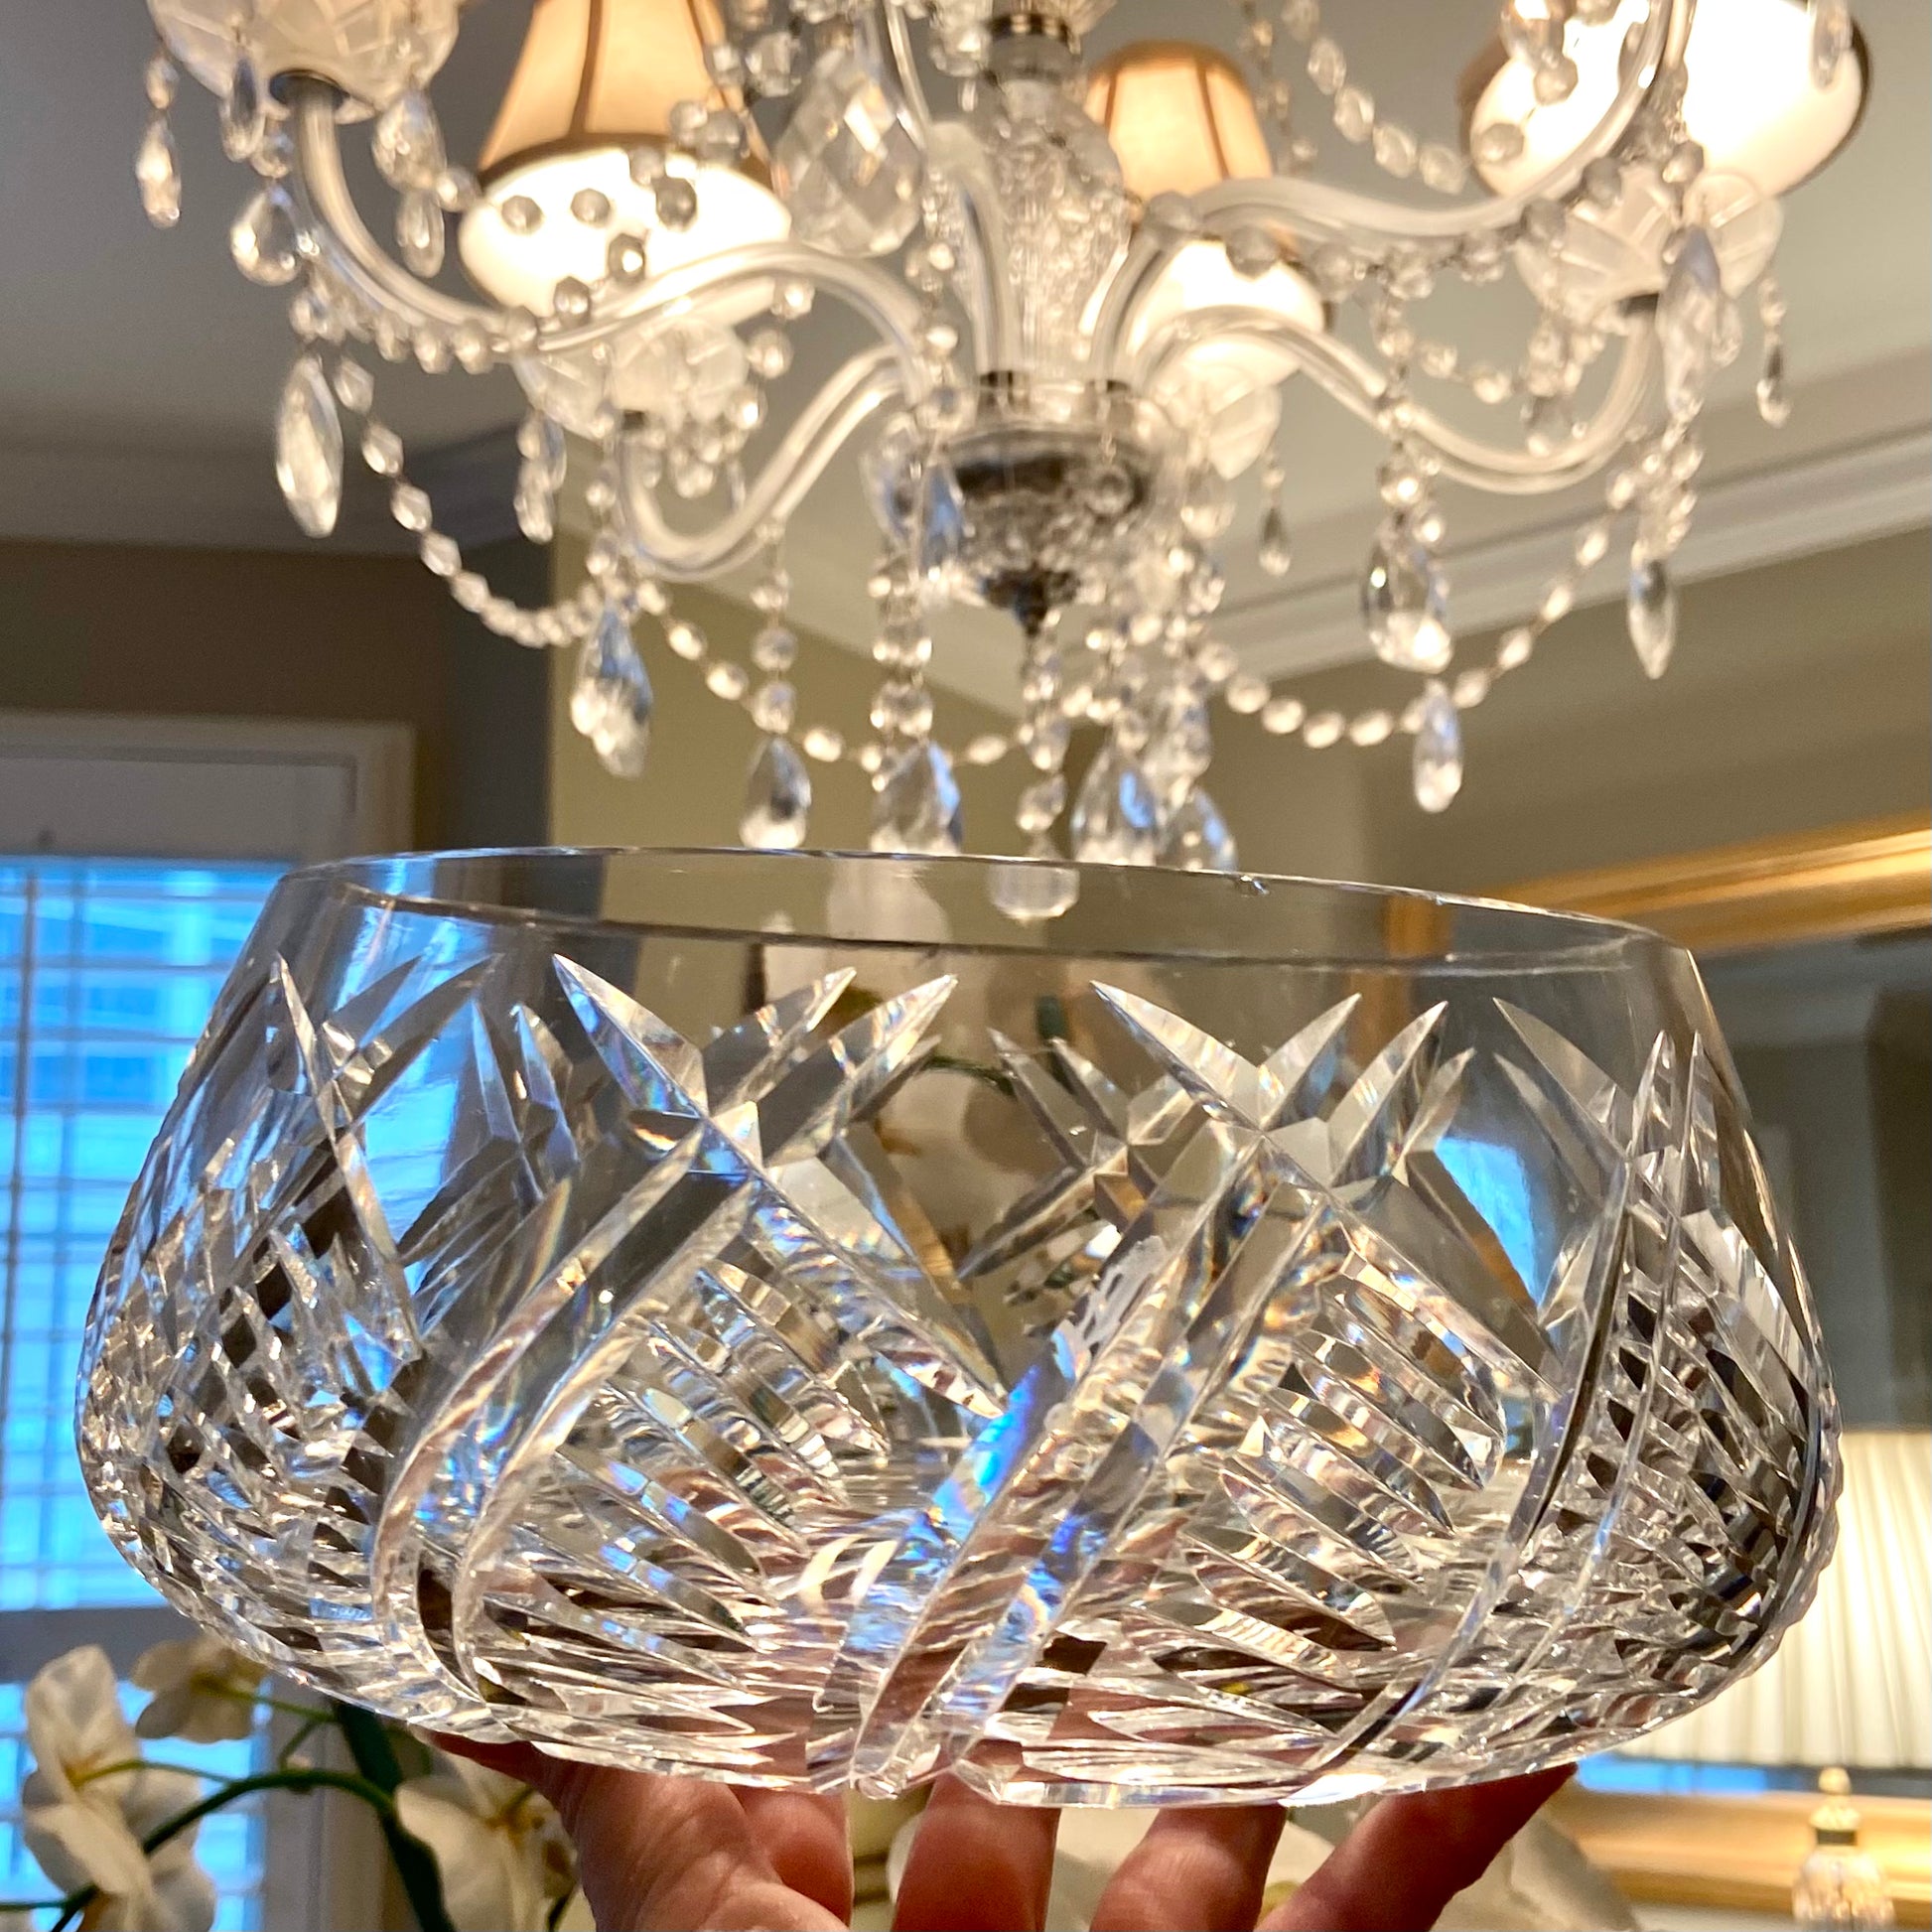 What Can Be Used to Decorate a Crystal Bowl?